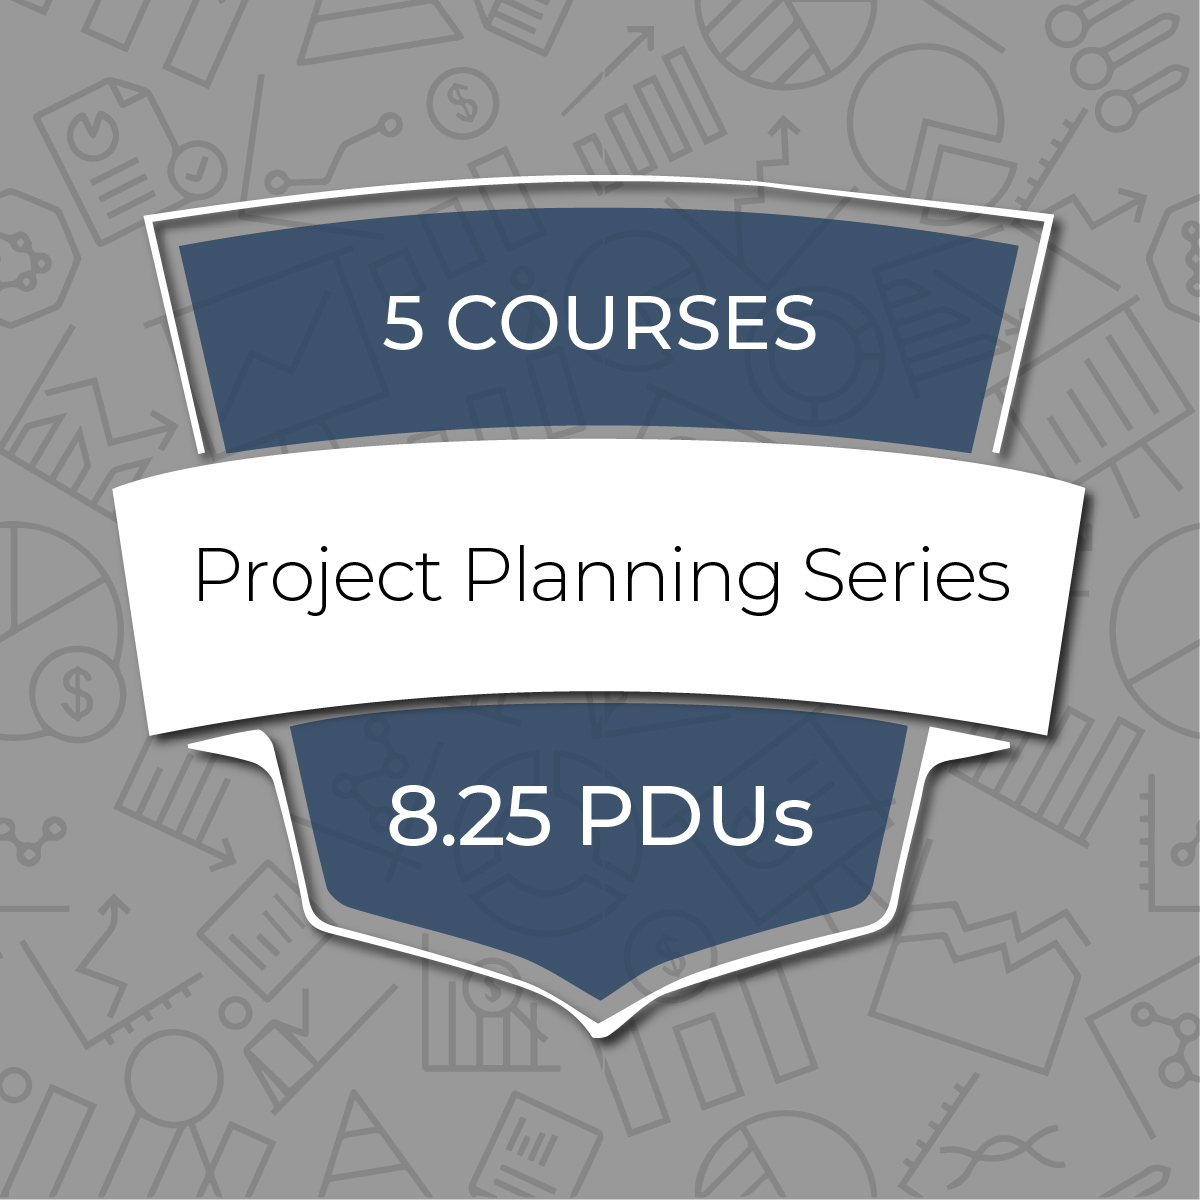 The Project Planning Series